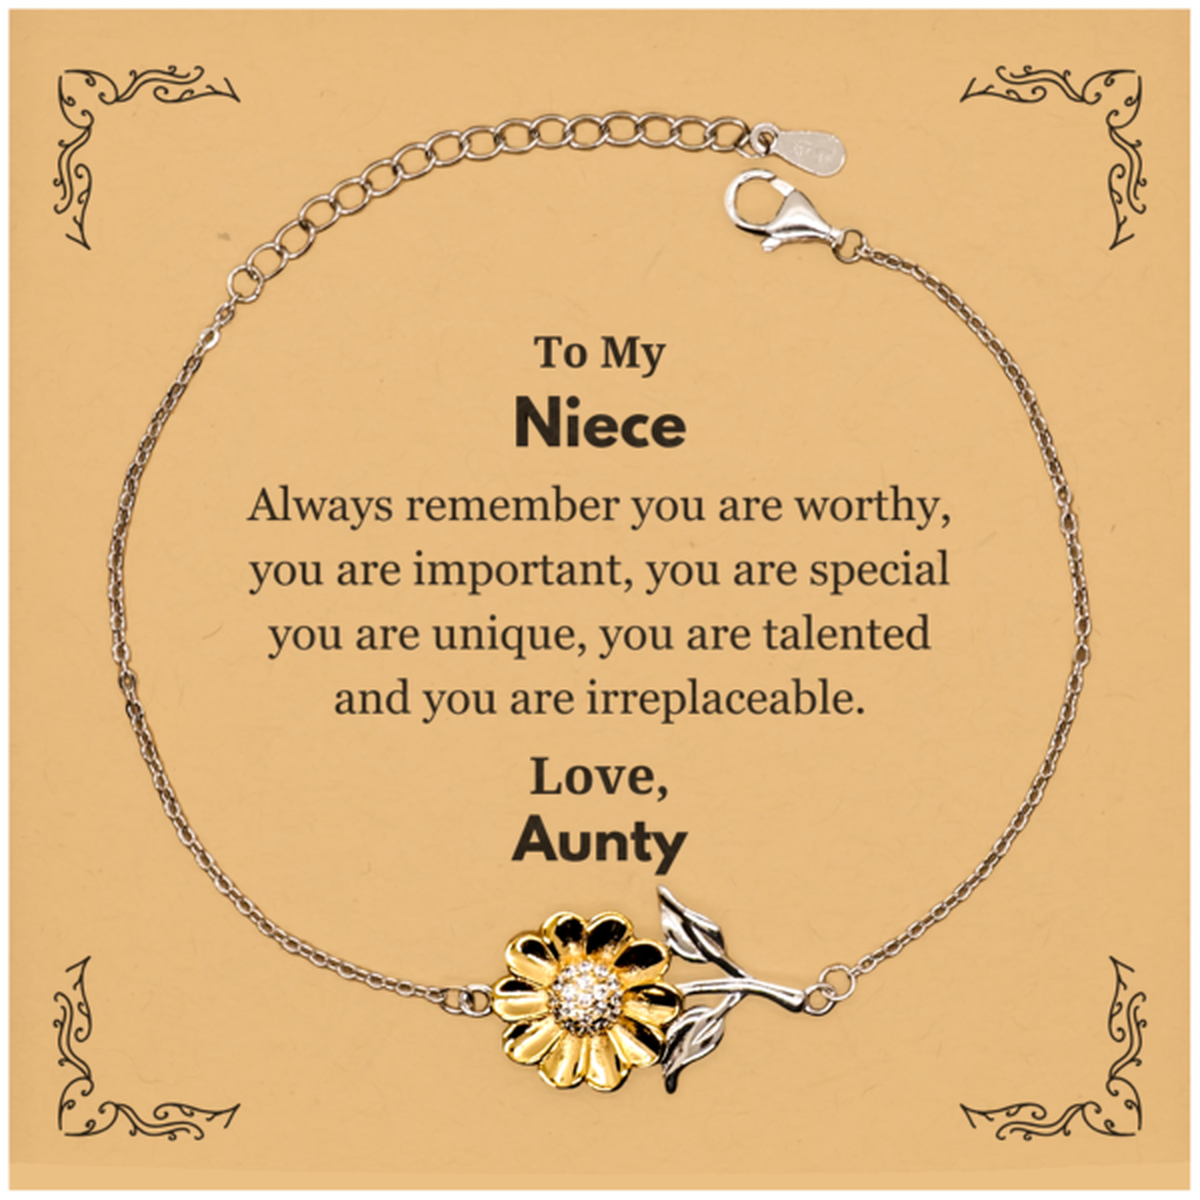 Niece Birthday Gifts from Aunty, Inspirational Sunflower Bracelet for Niece Christmas Graduation Gifts for Niece Always remember you are worthy, you are important. Love, Aunty